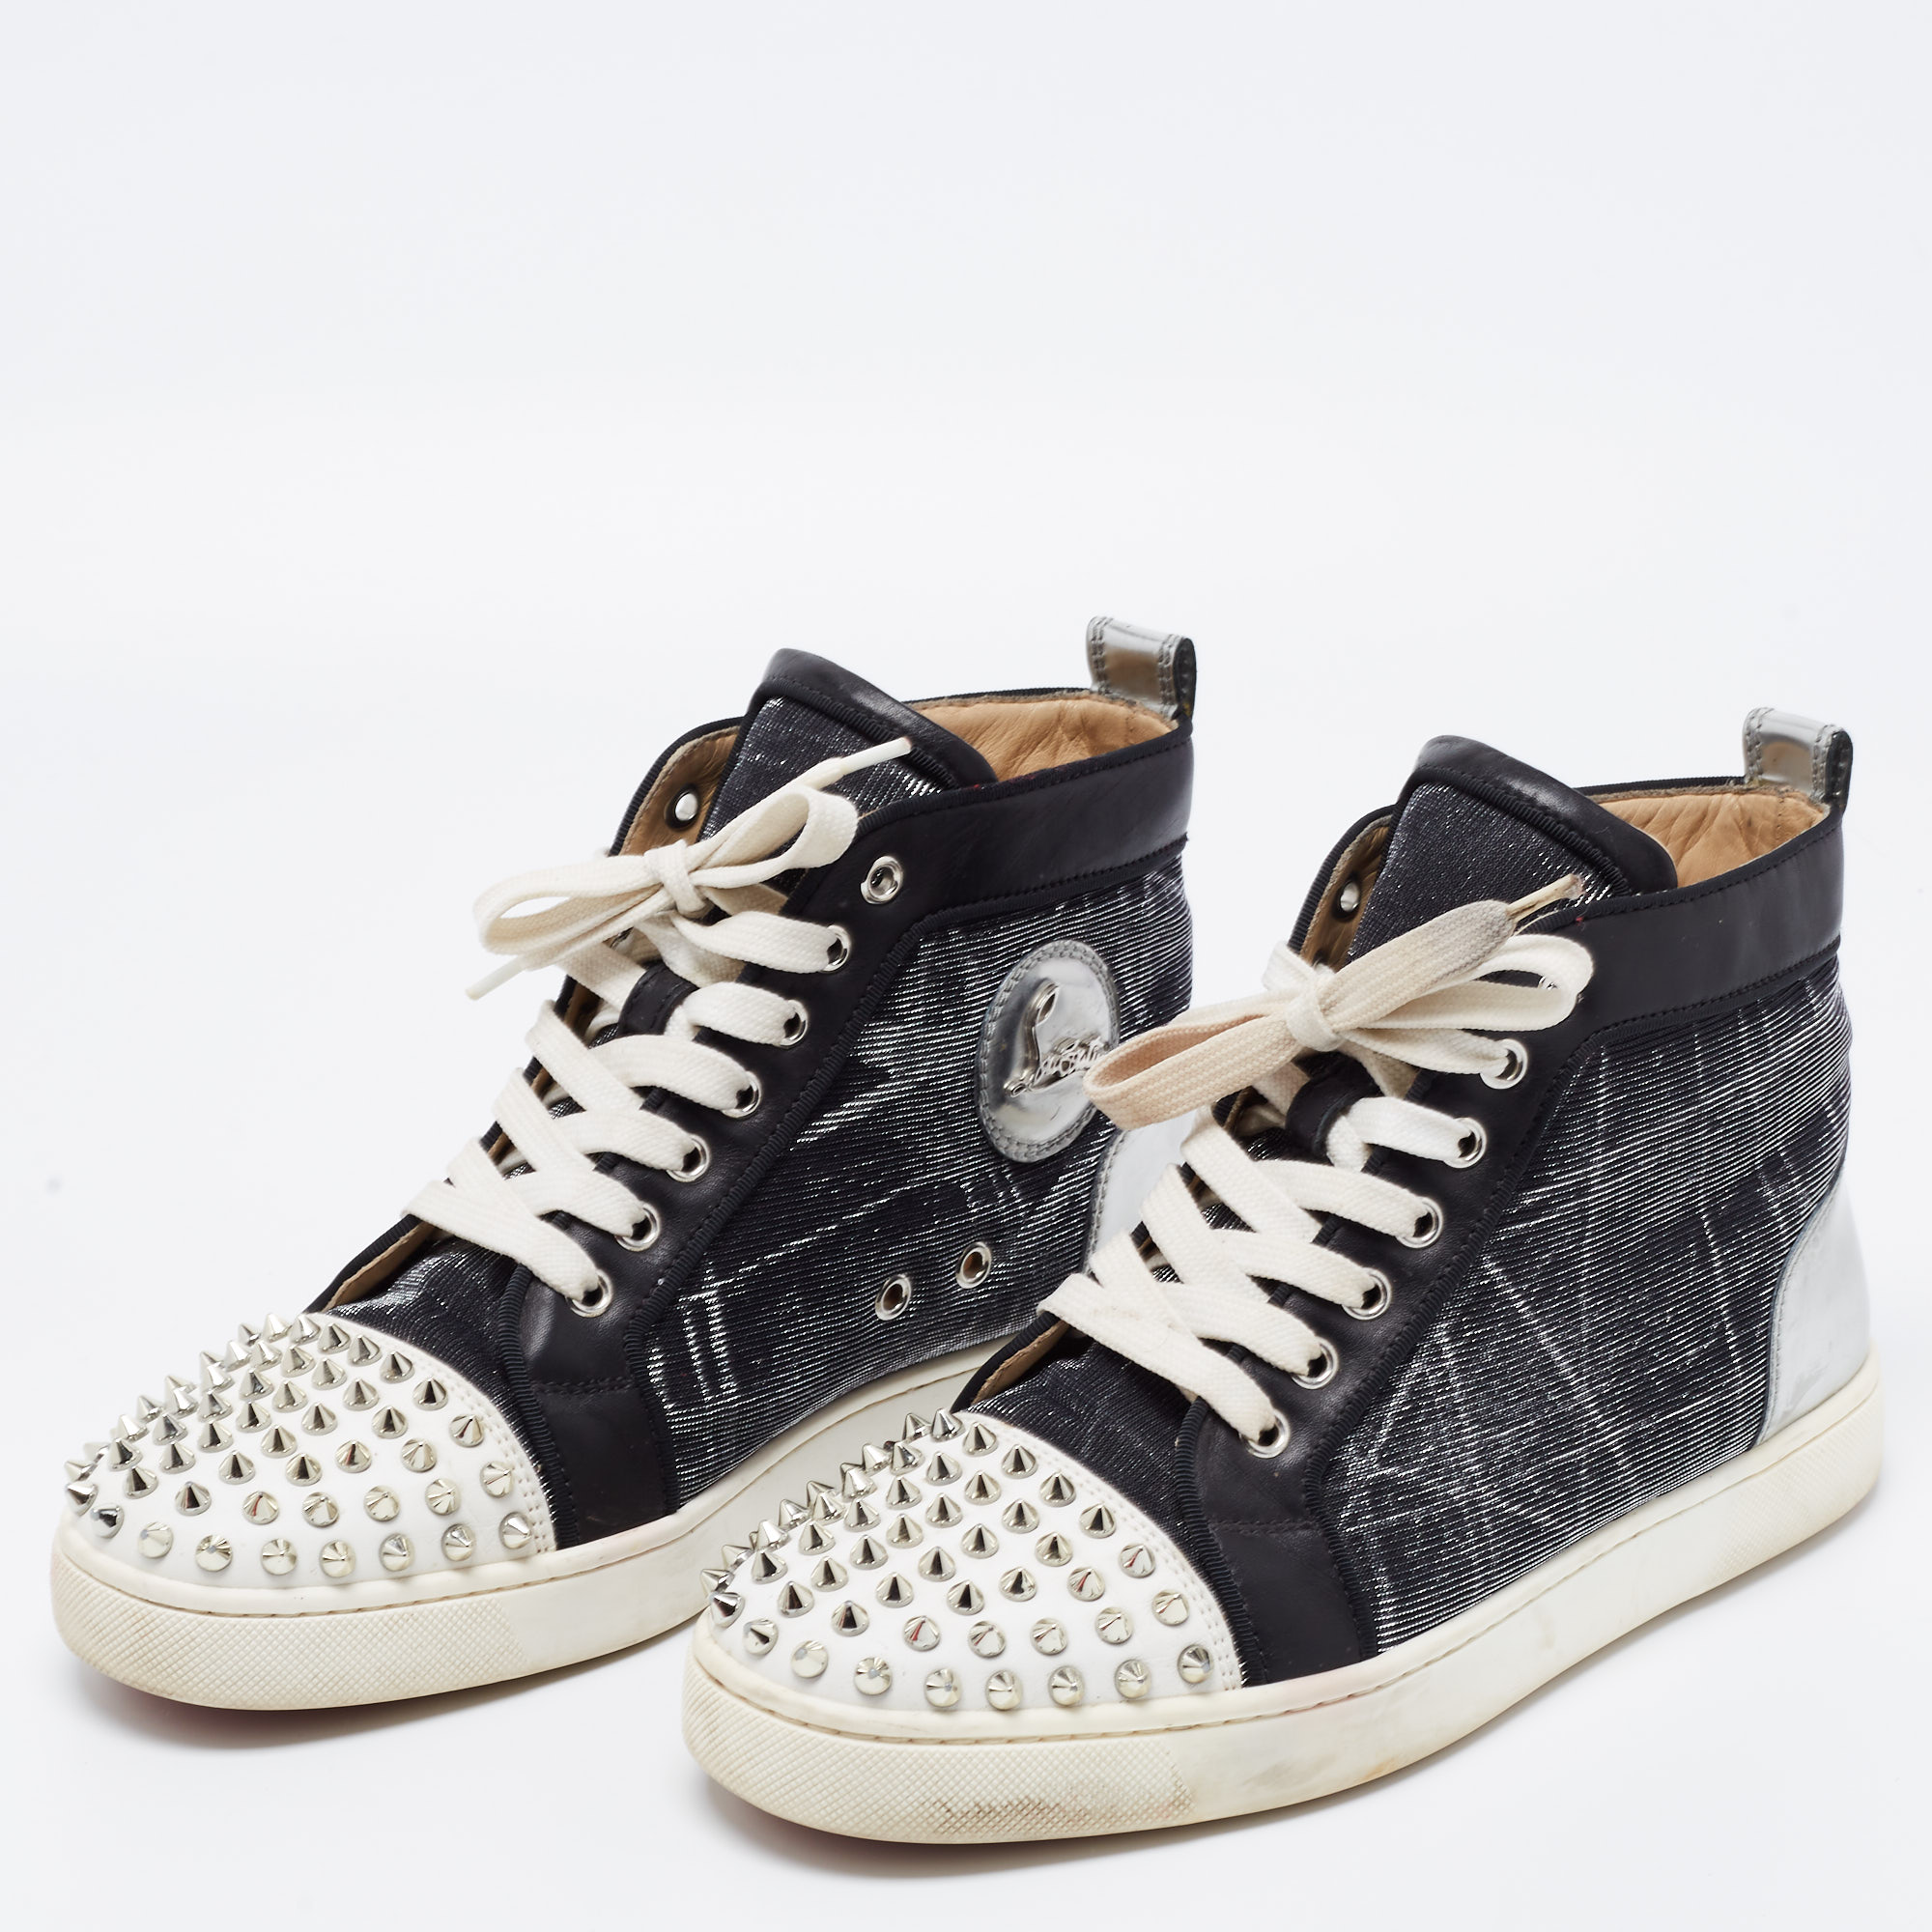 

Christian Louboutin Black/White Fabric and Leather Lou Degra Spikes Studded High Top Sneaker Size